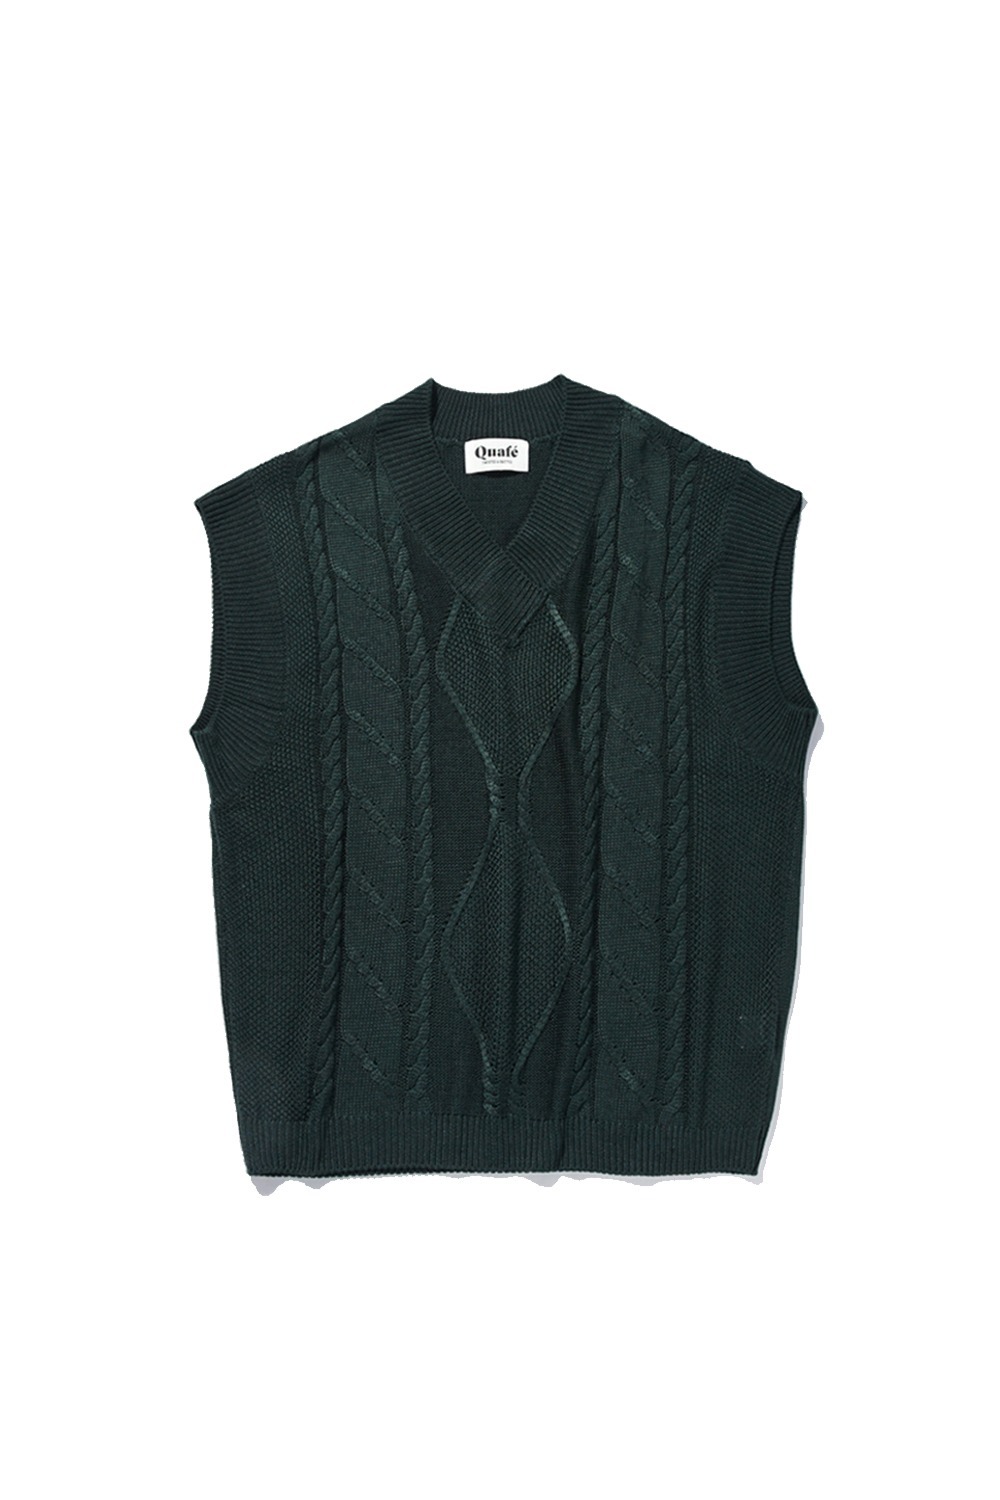 [REFURB] CABLE KNIT VEST_green